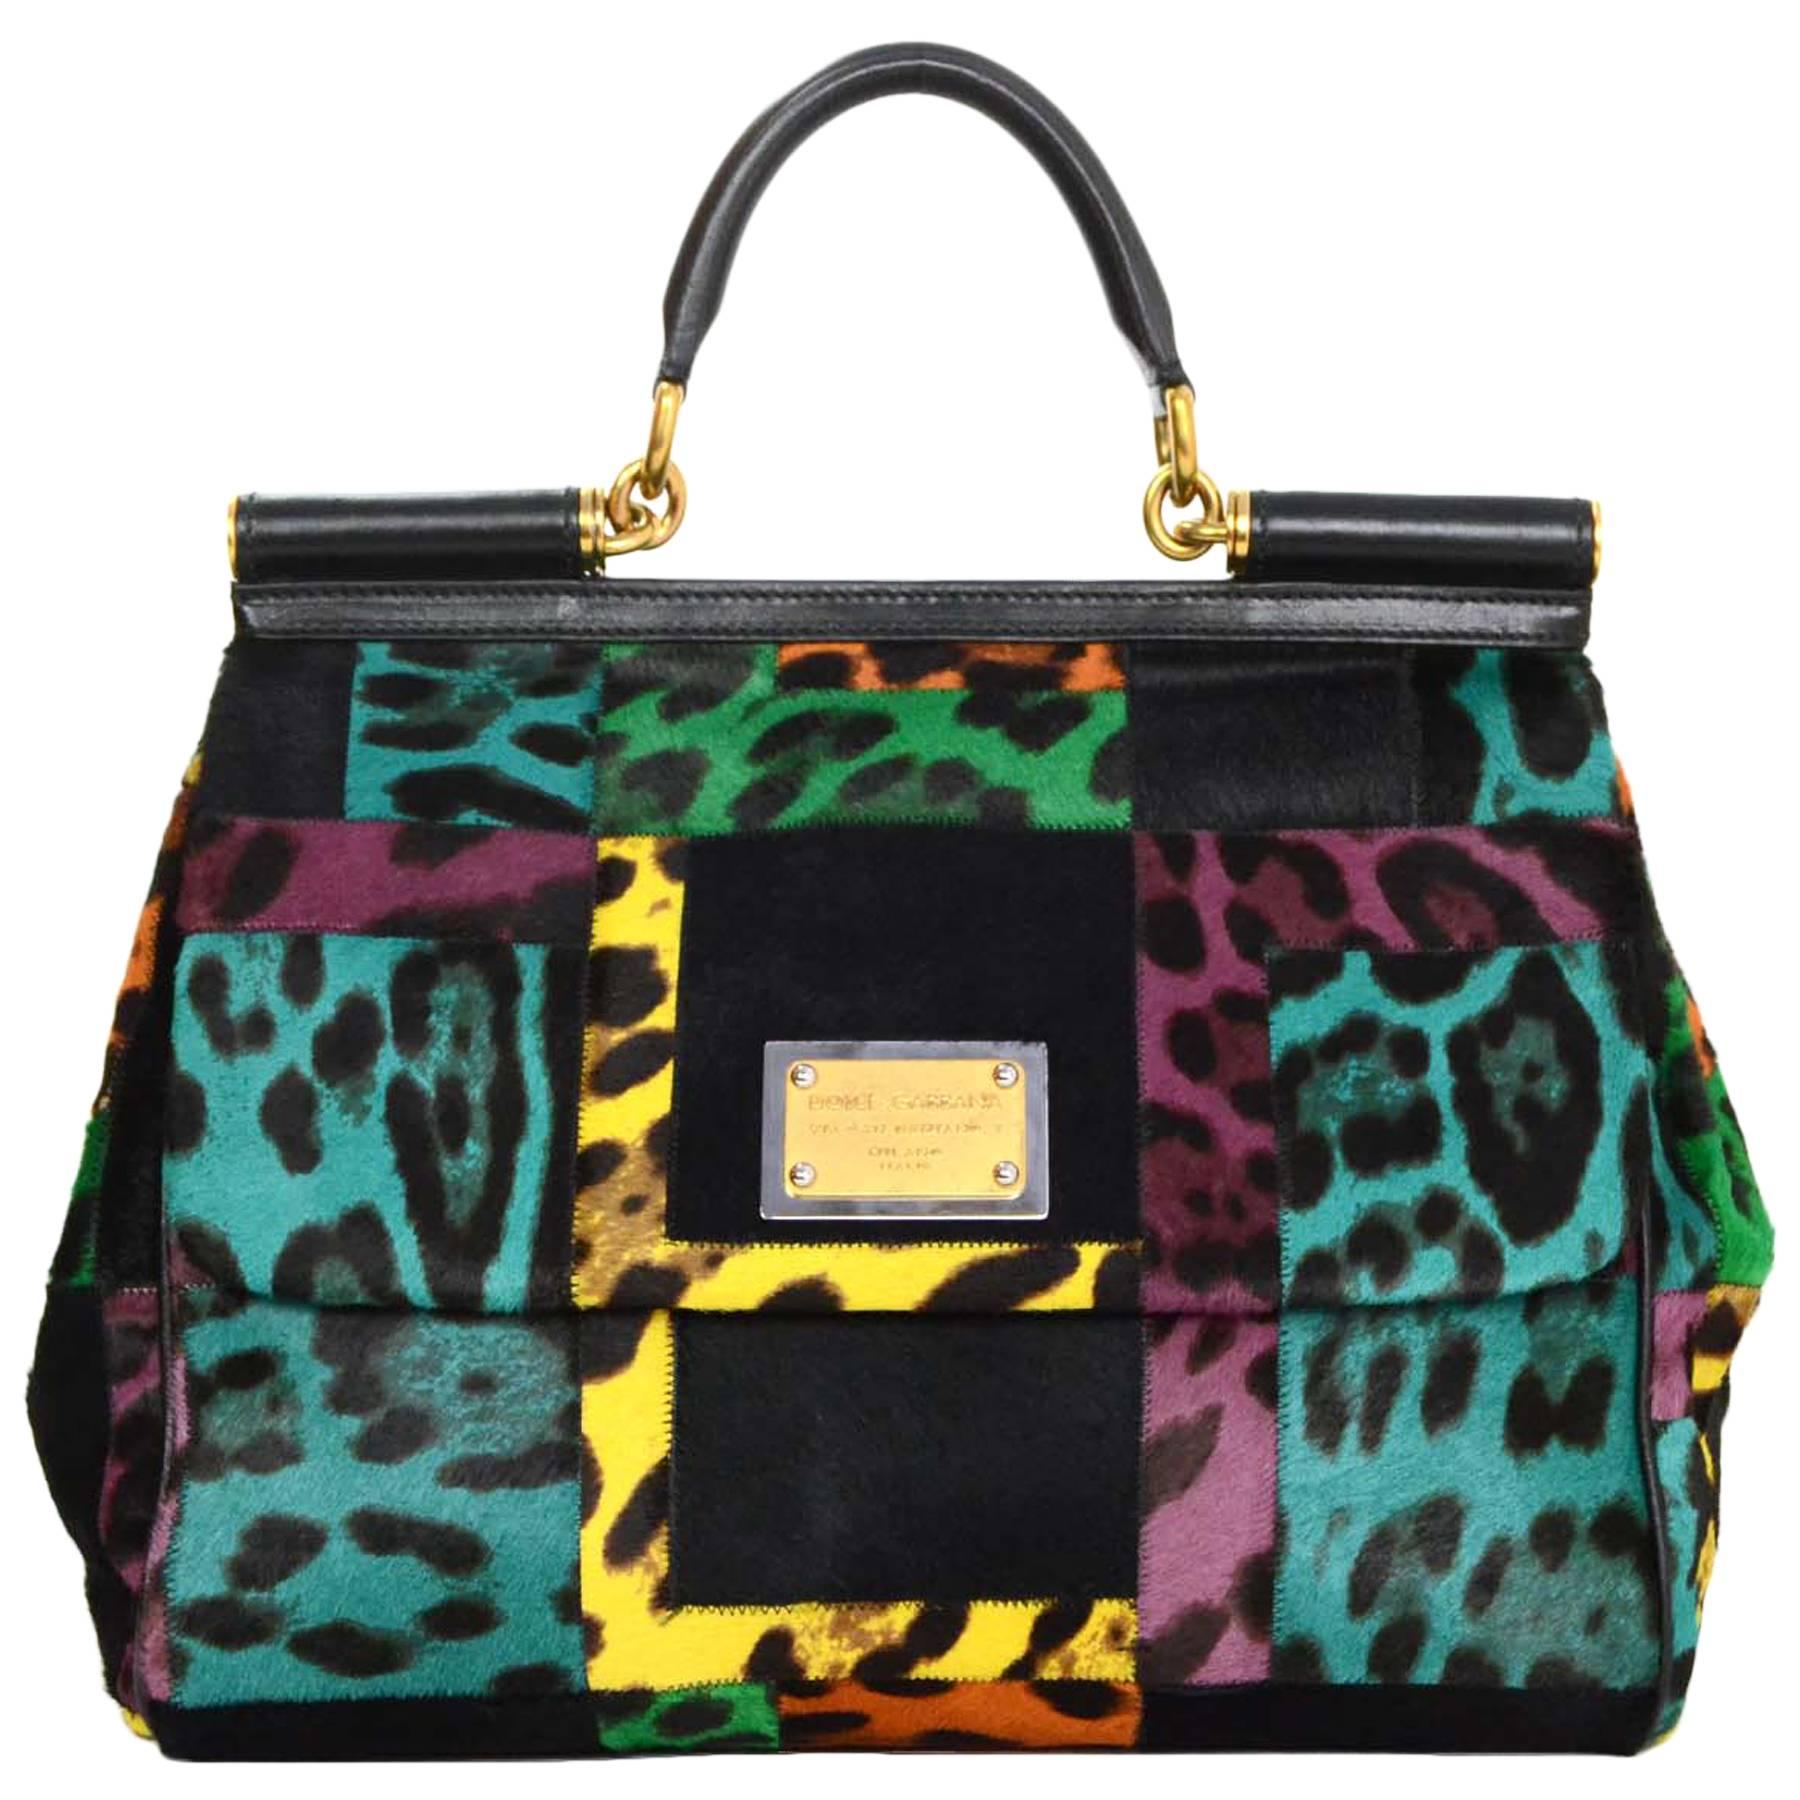 Dolce & Gabbana Sicily Leopard Print Pony-hair Patchwork Bag with Strap GHW